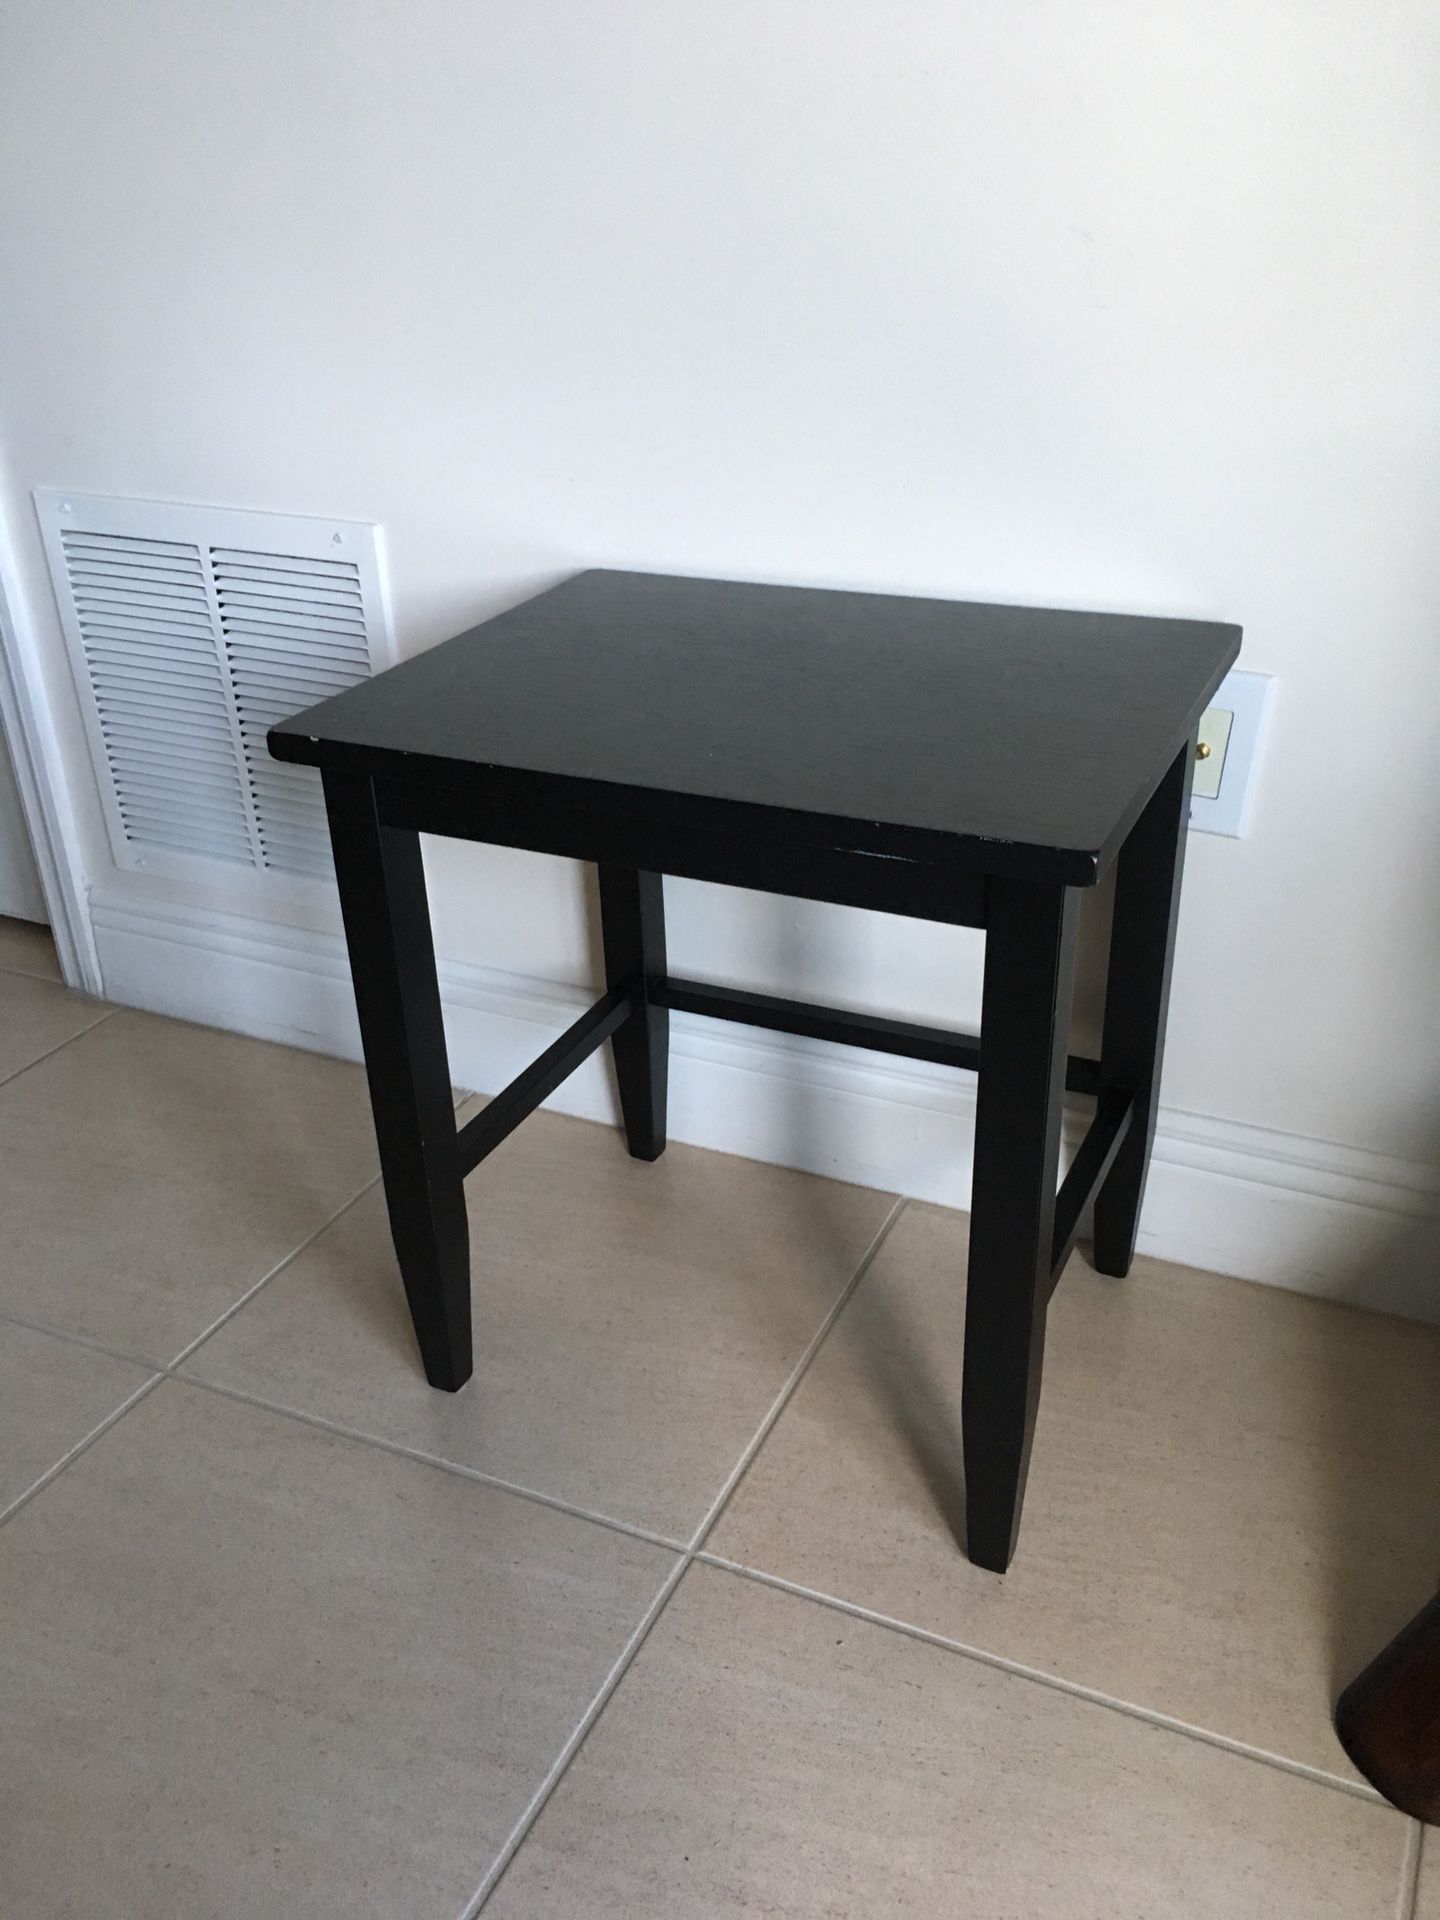 Nice Black Wood End Table well made.